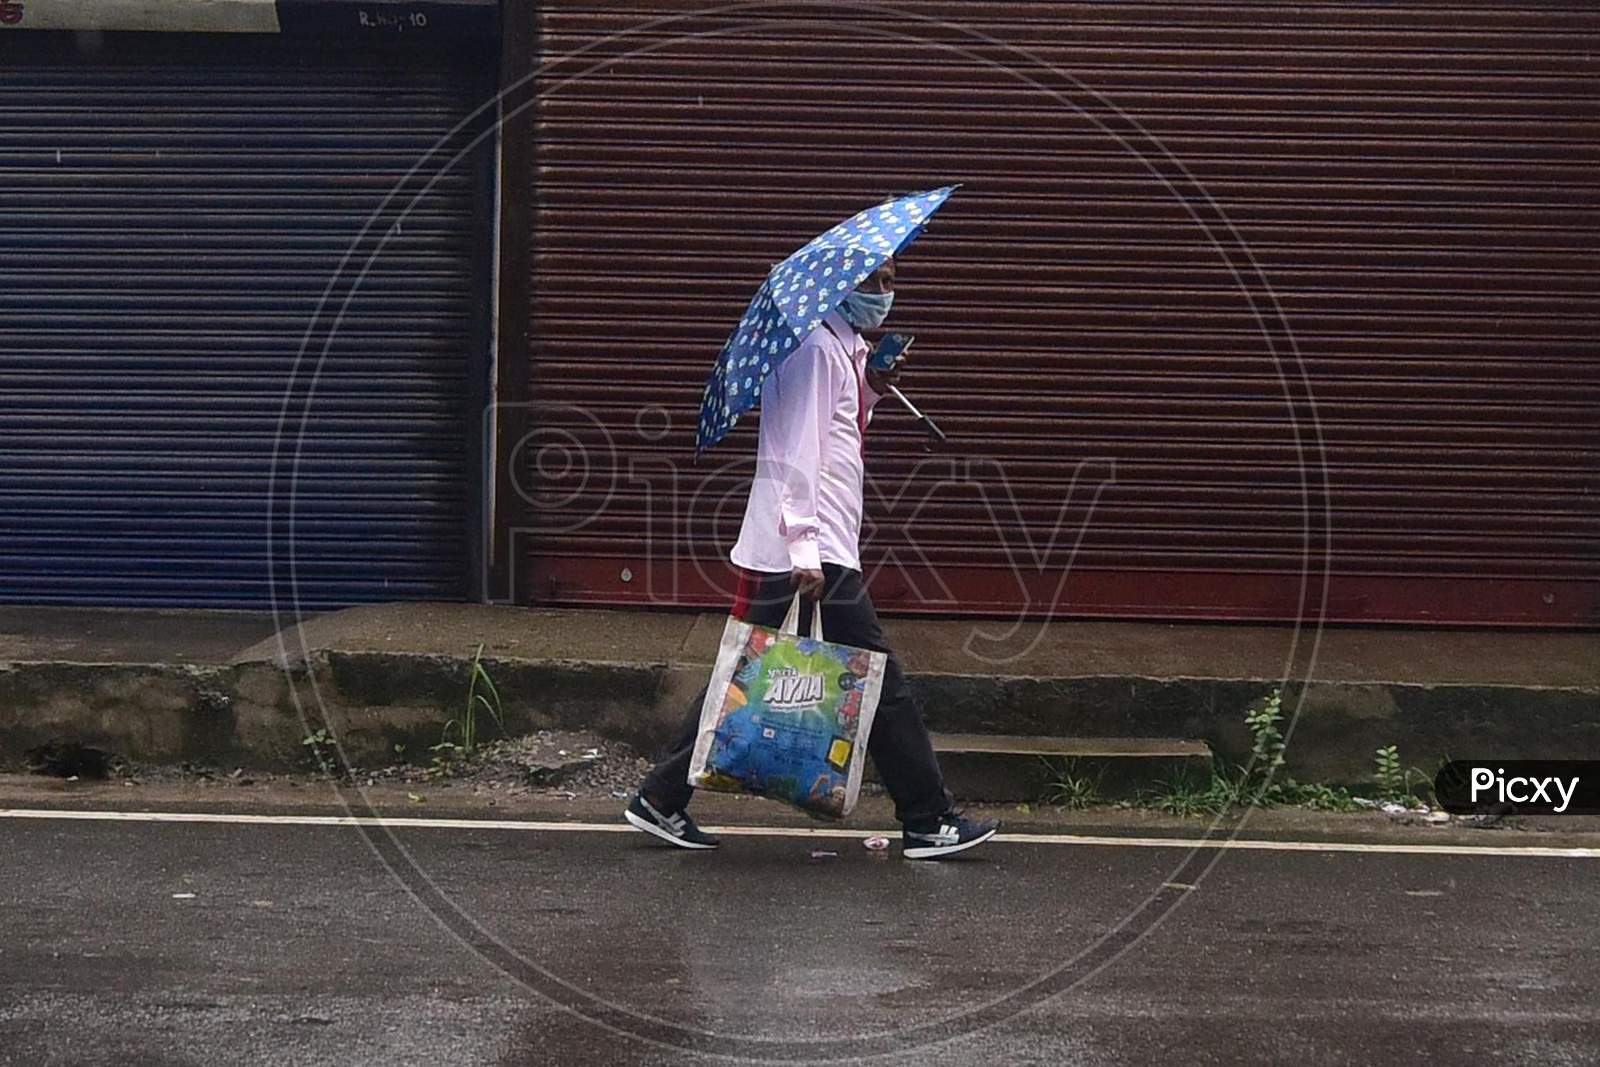 A man Walks near Closed Markets During Rains In Nagaon District Of Assam On  Saturday, June 27, 2020. Authority Announced The Imposition Of A Weekend Lockdown In All Urban Areas Of The State